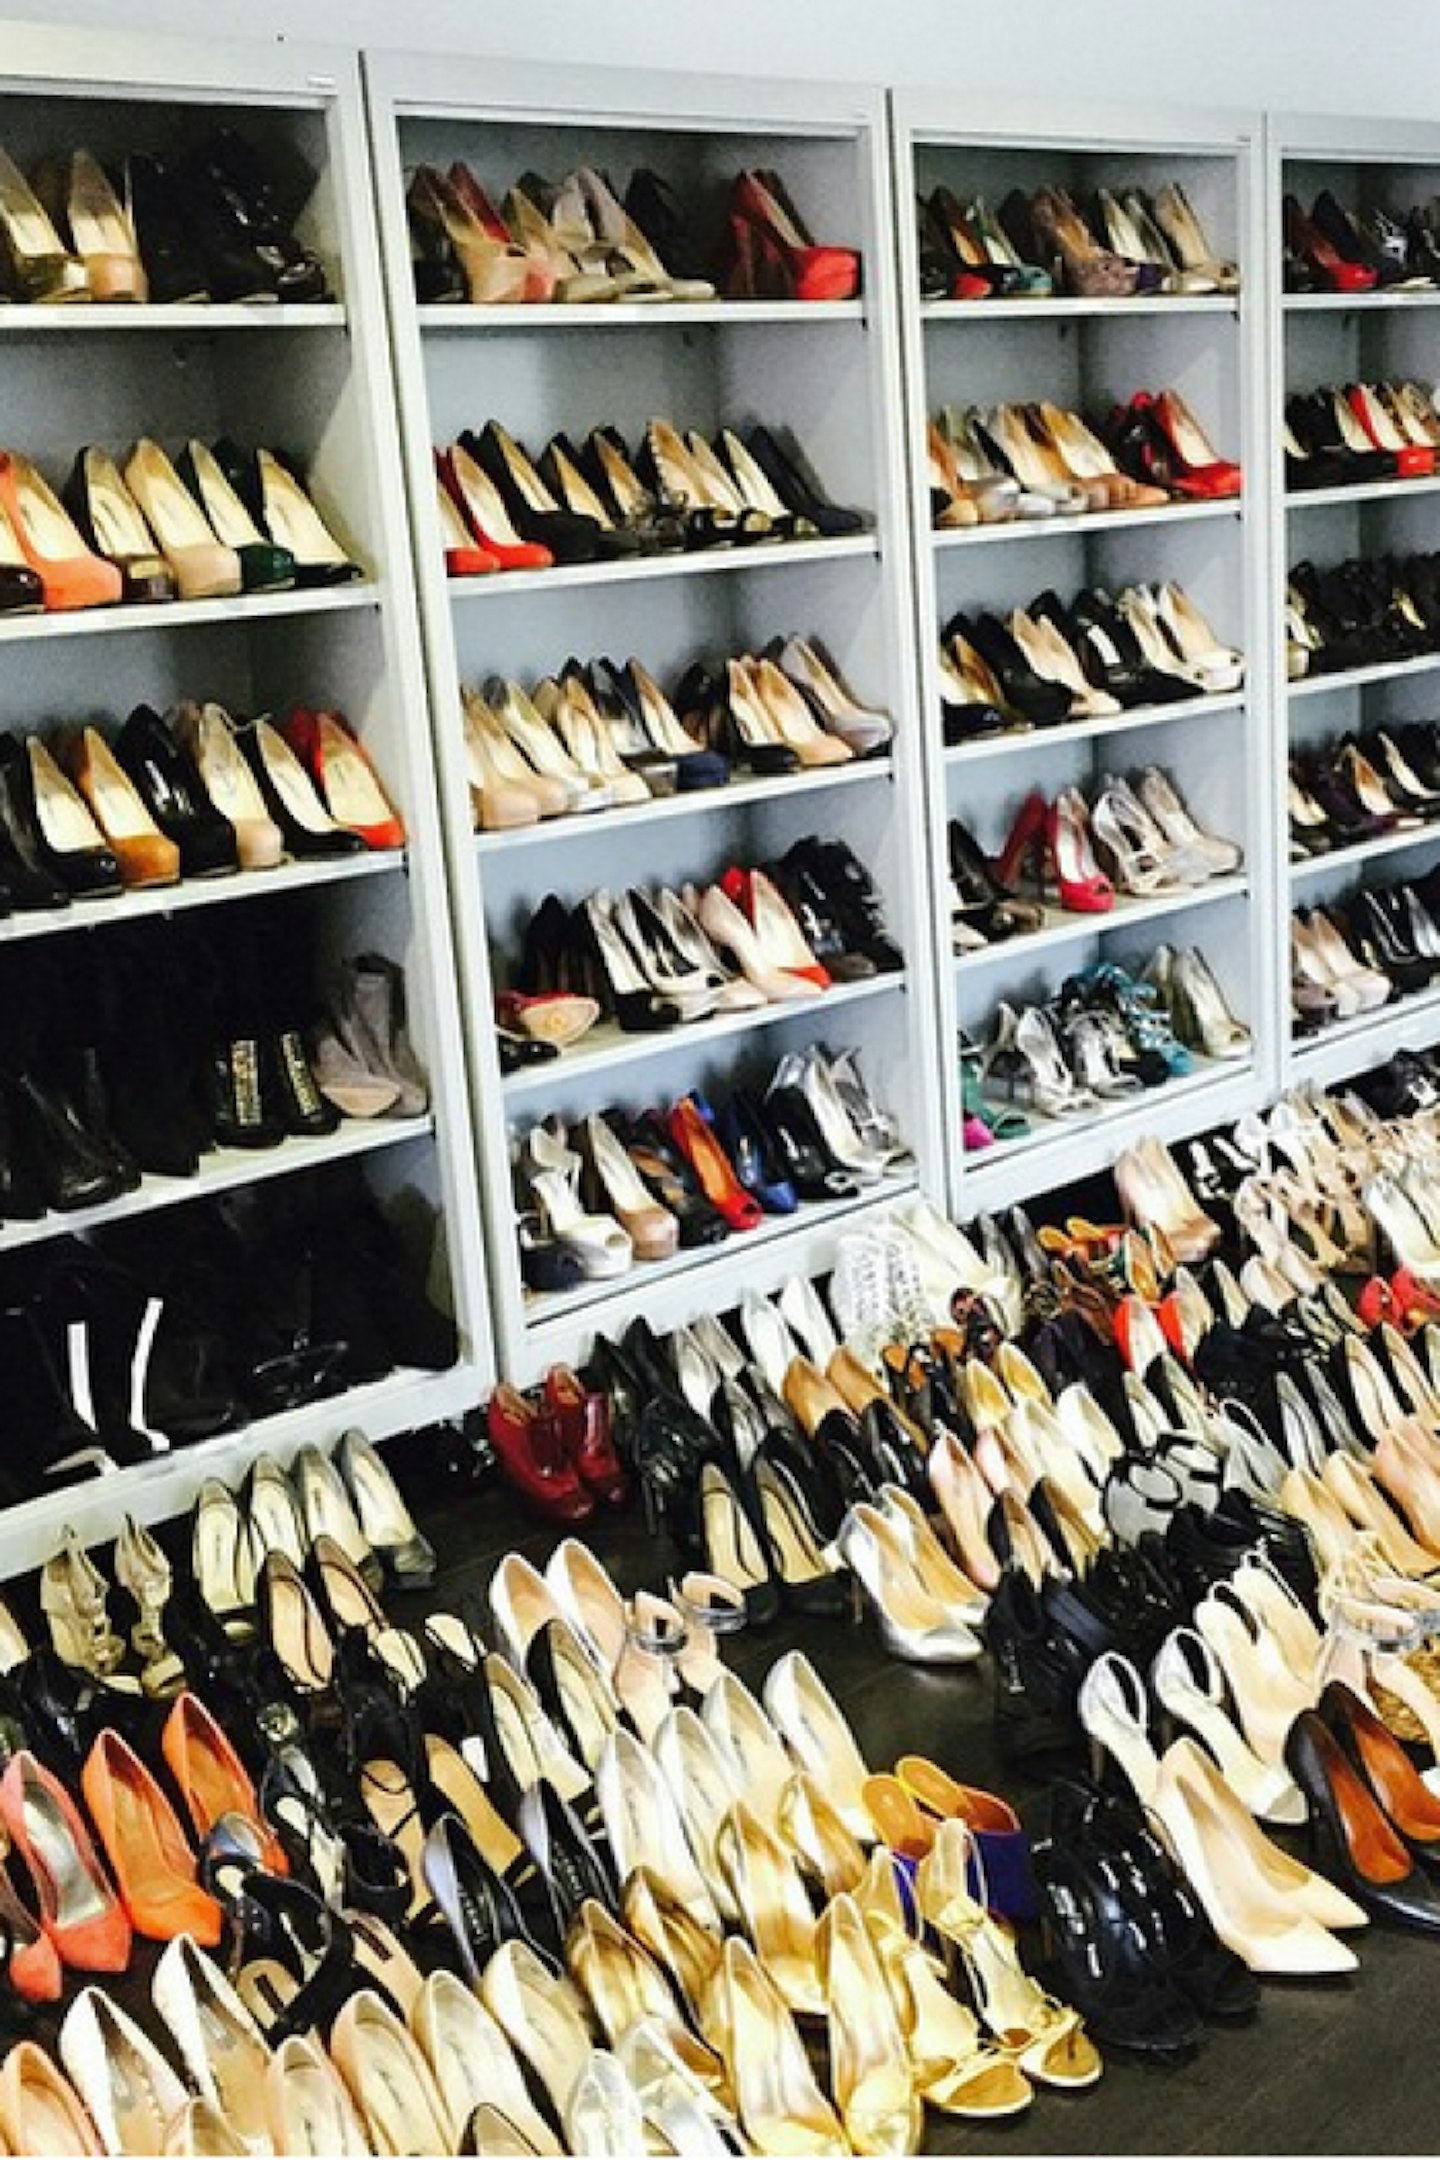 9 Insane Celebrity Closets, From Kylie Jenner To Lauren Conrad